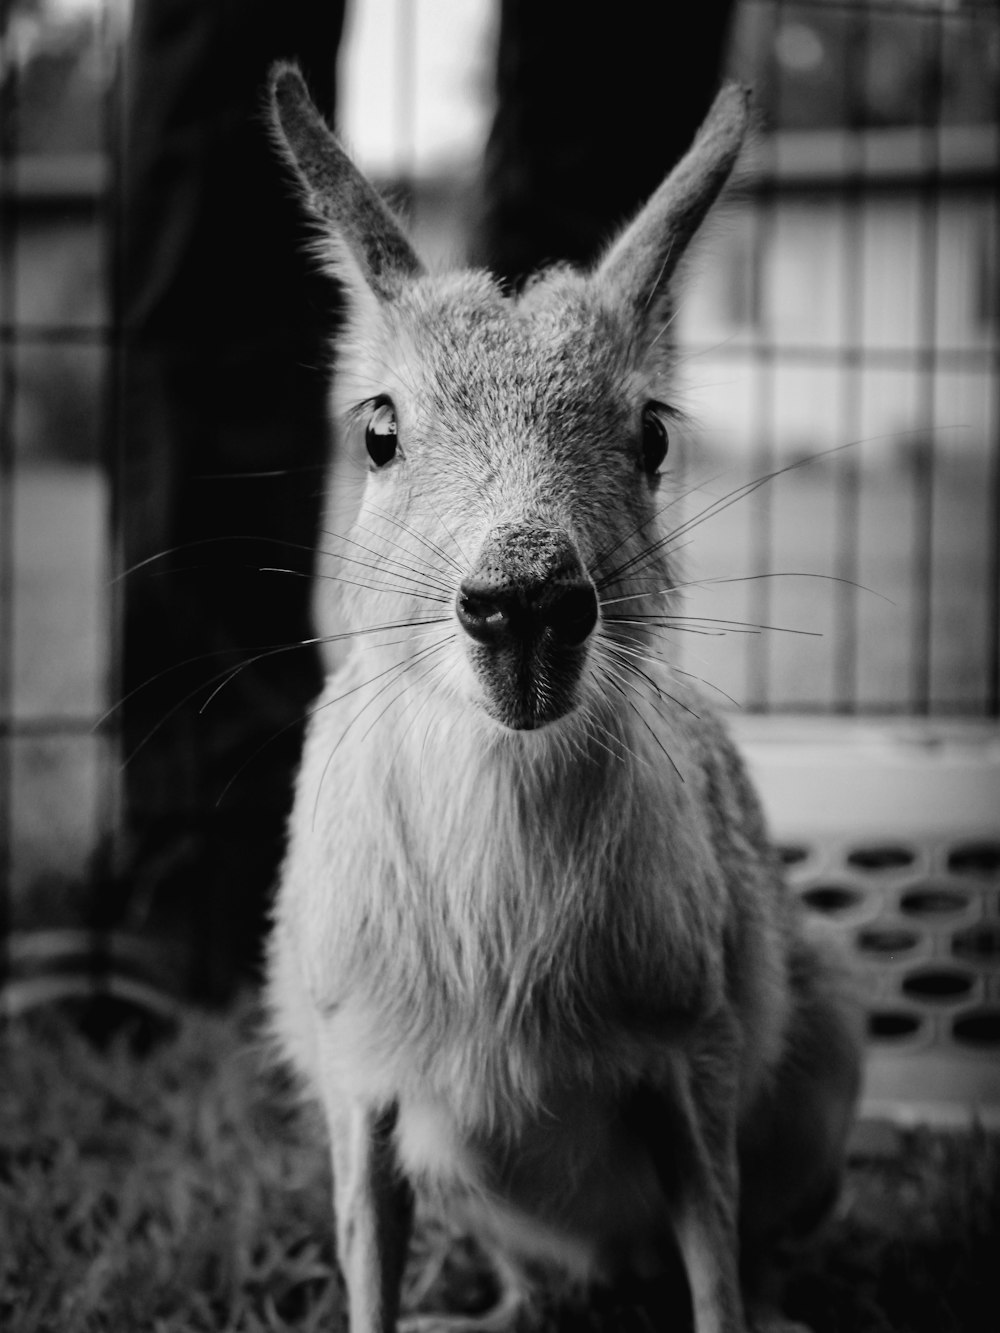 grayscale photo of a rabbit